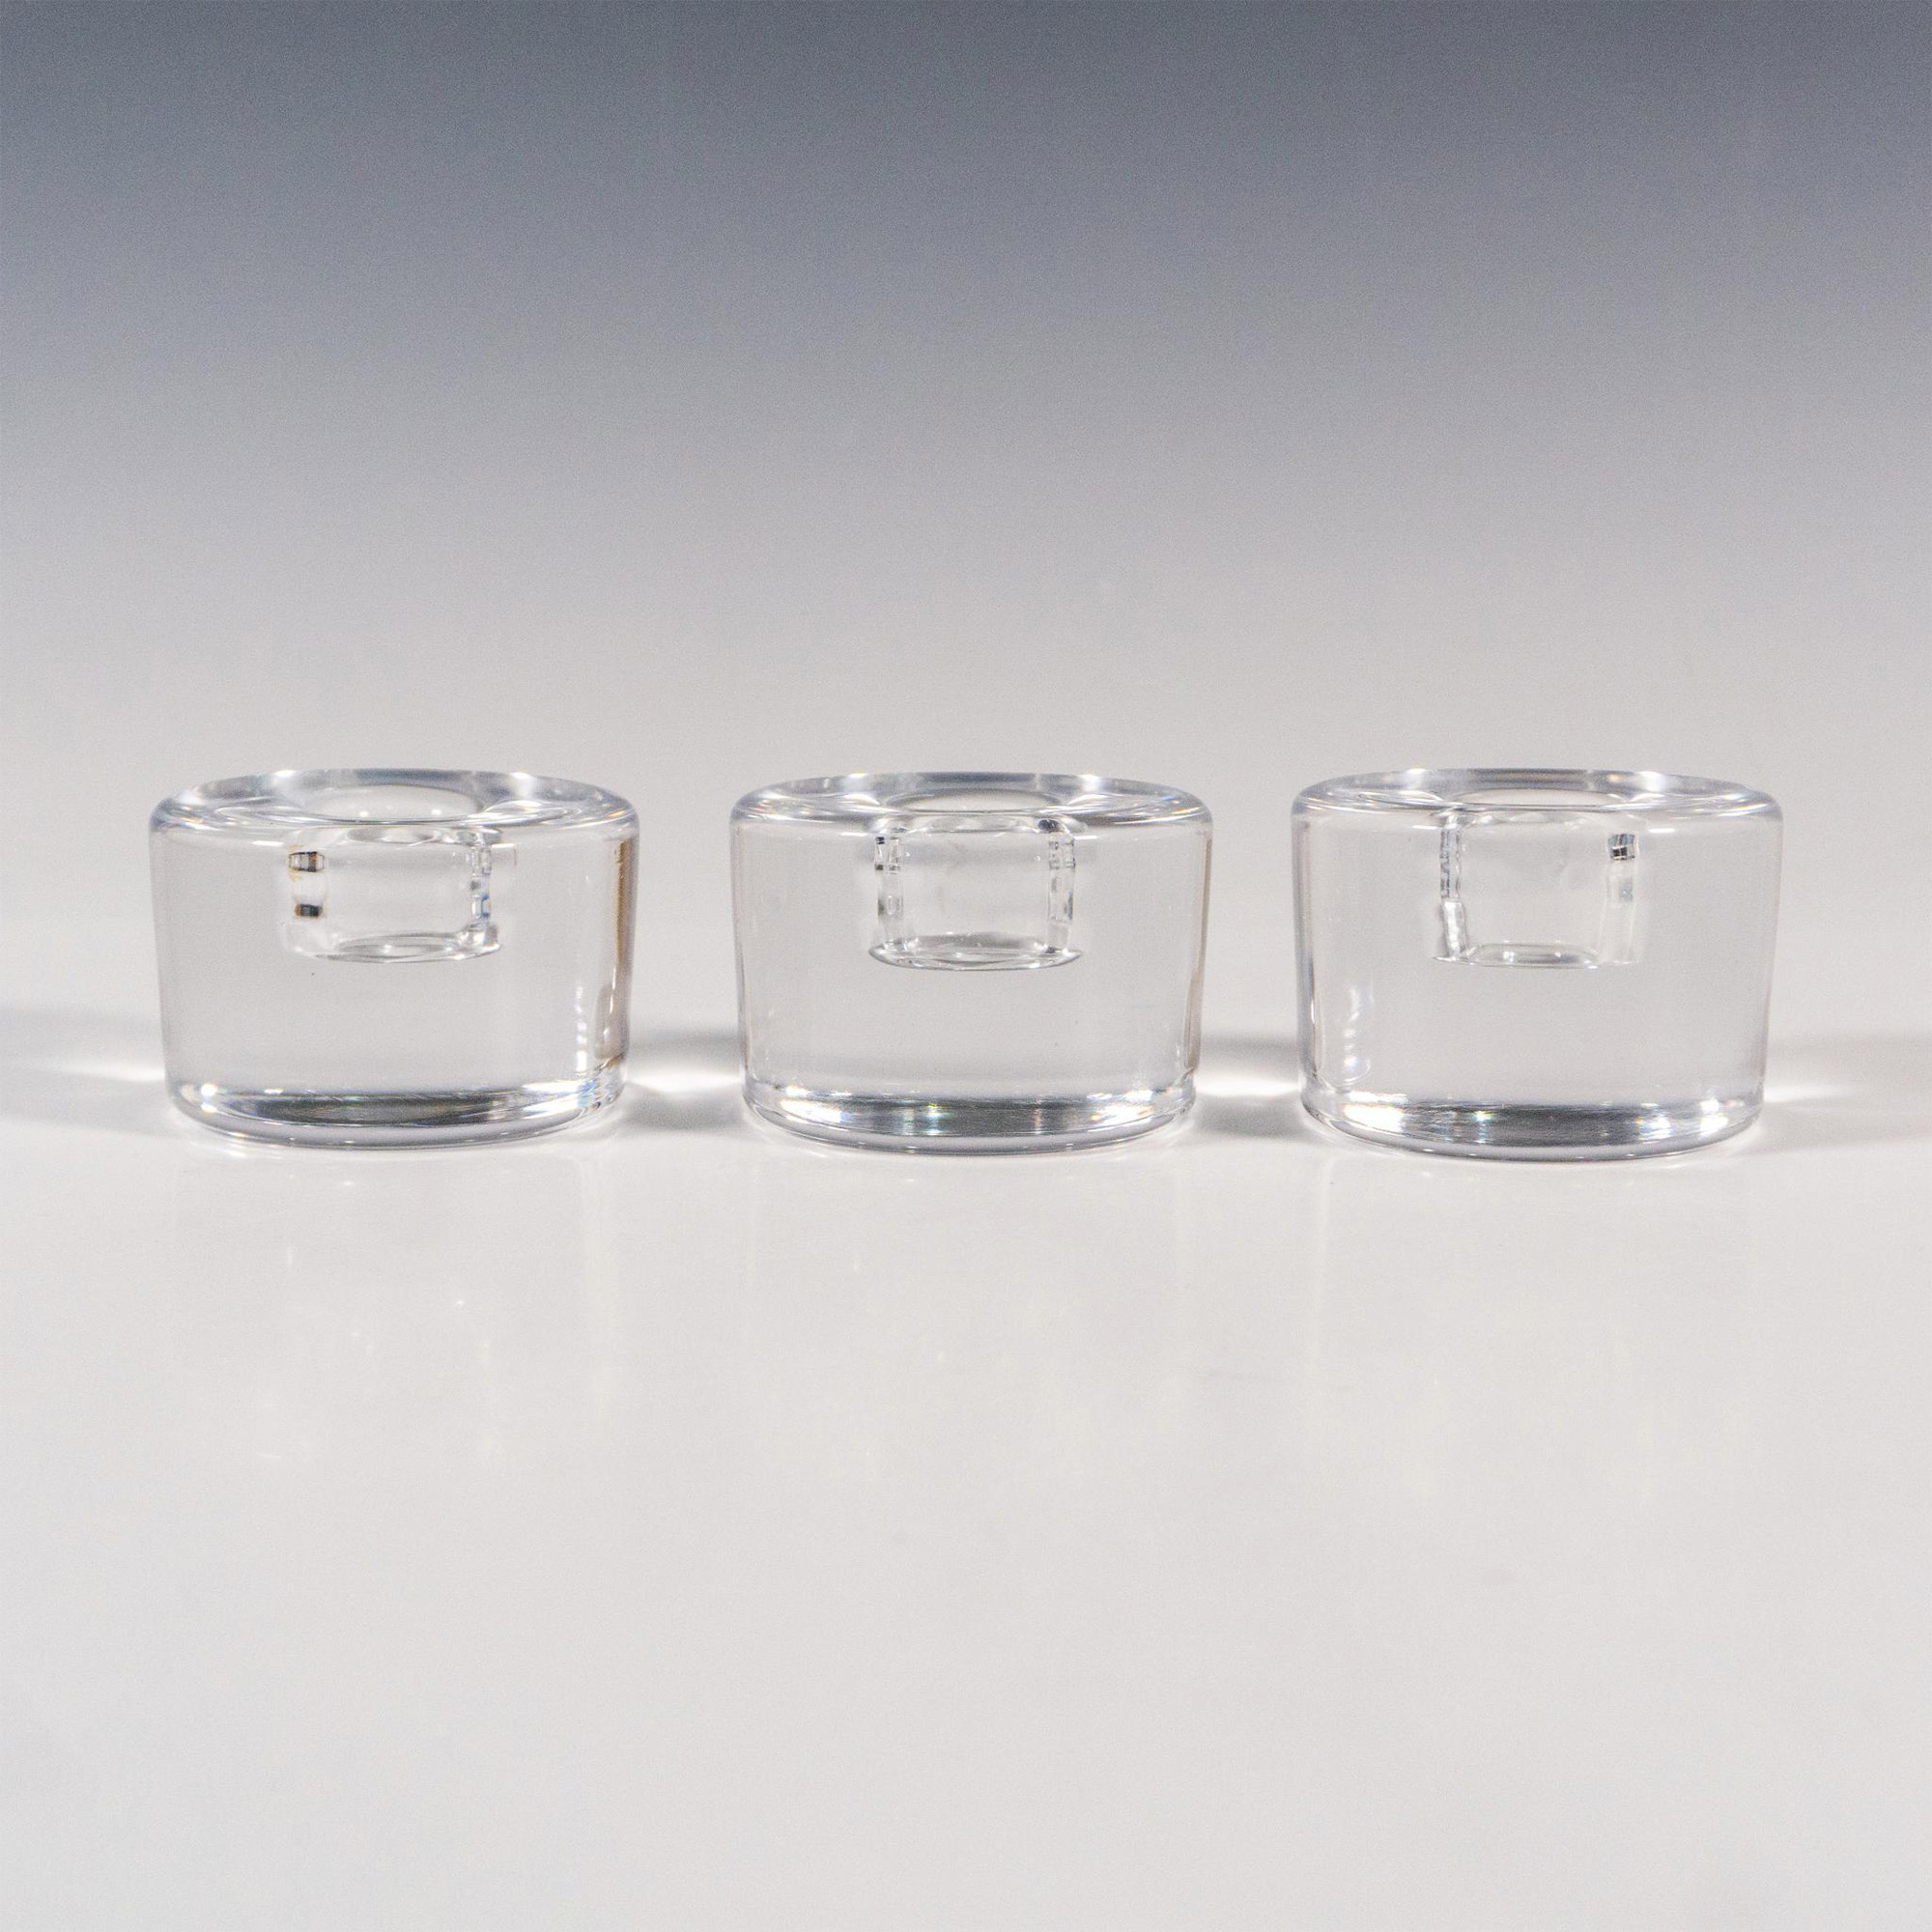 3pc Orrefors Crystal Candle Holders, Puck Votive